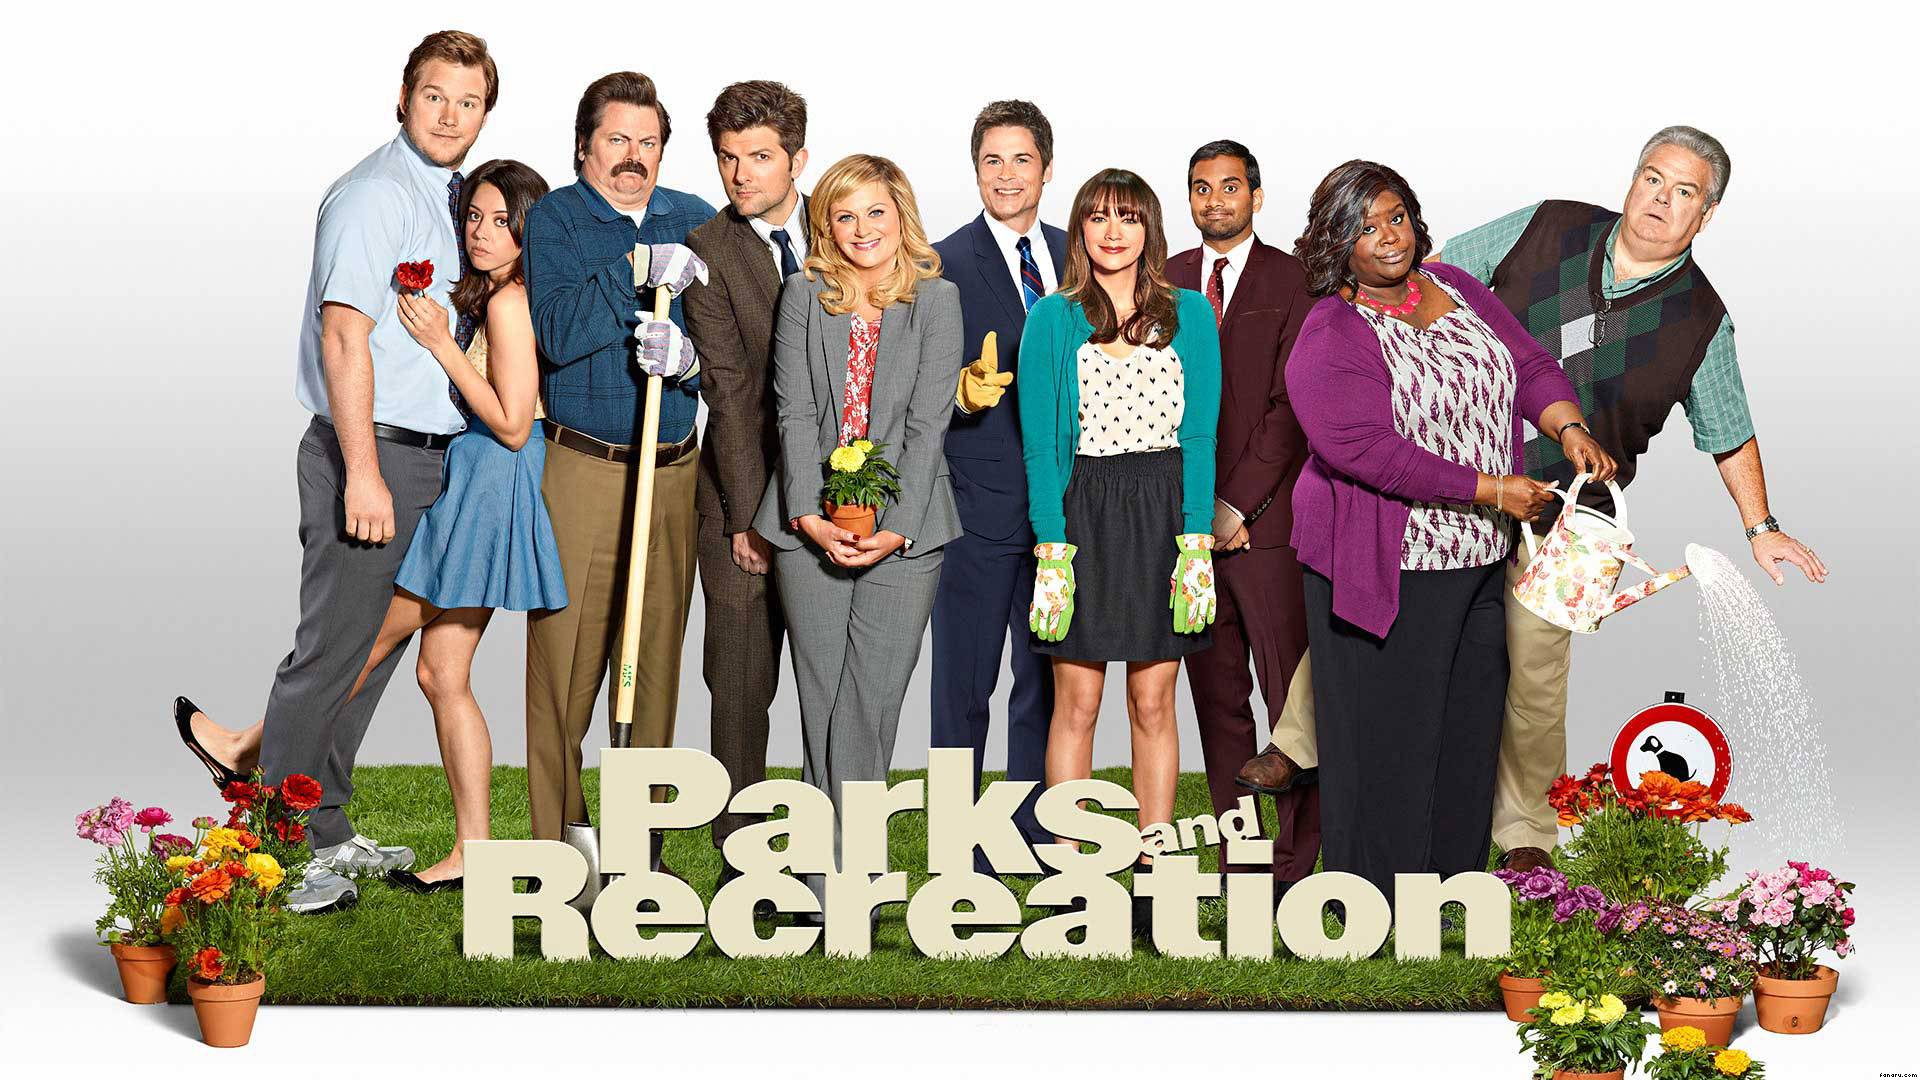 Parks And Recreation Wallpapers, Amazing 100% Quality HD Parks And